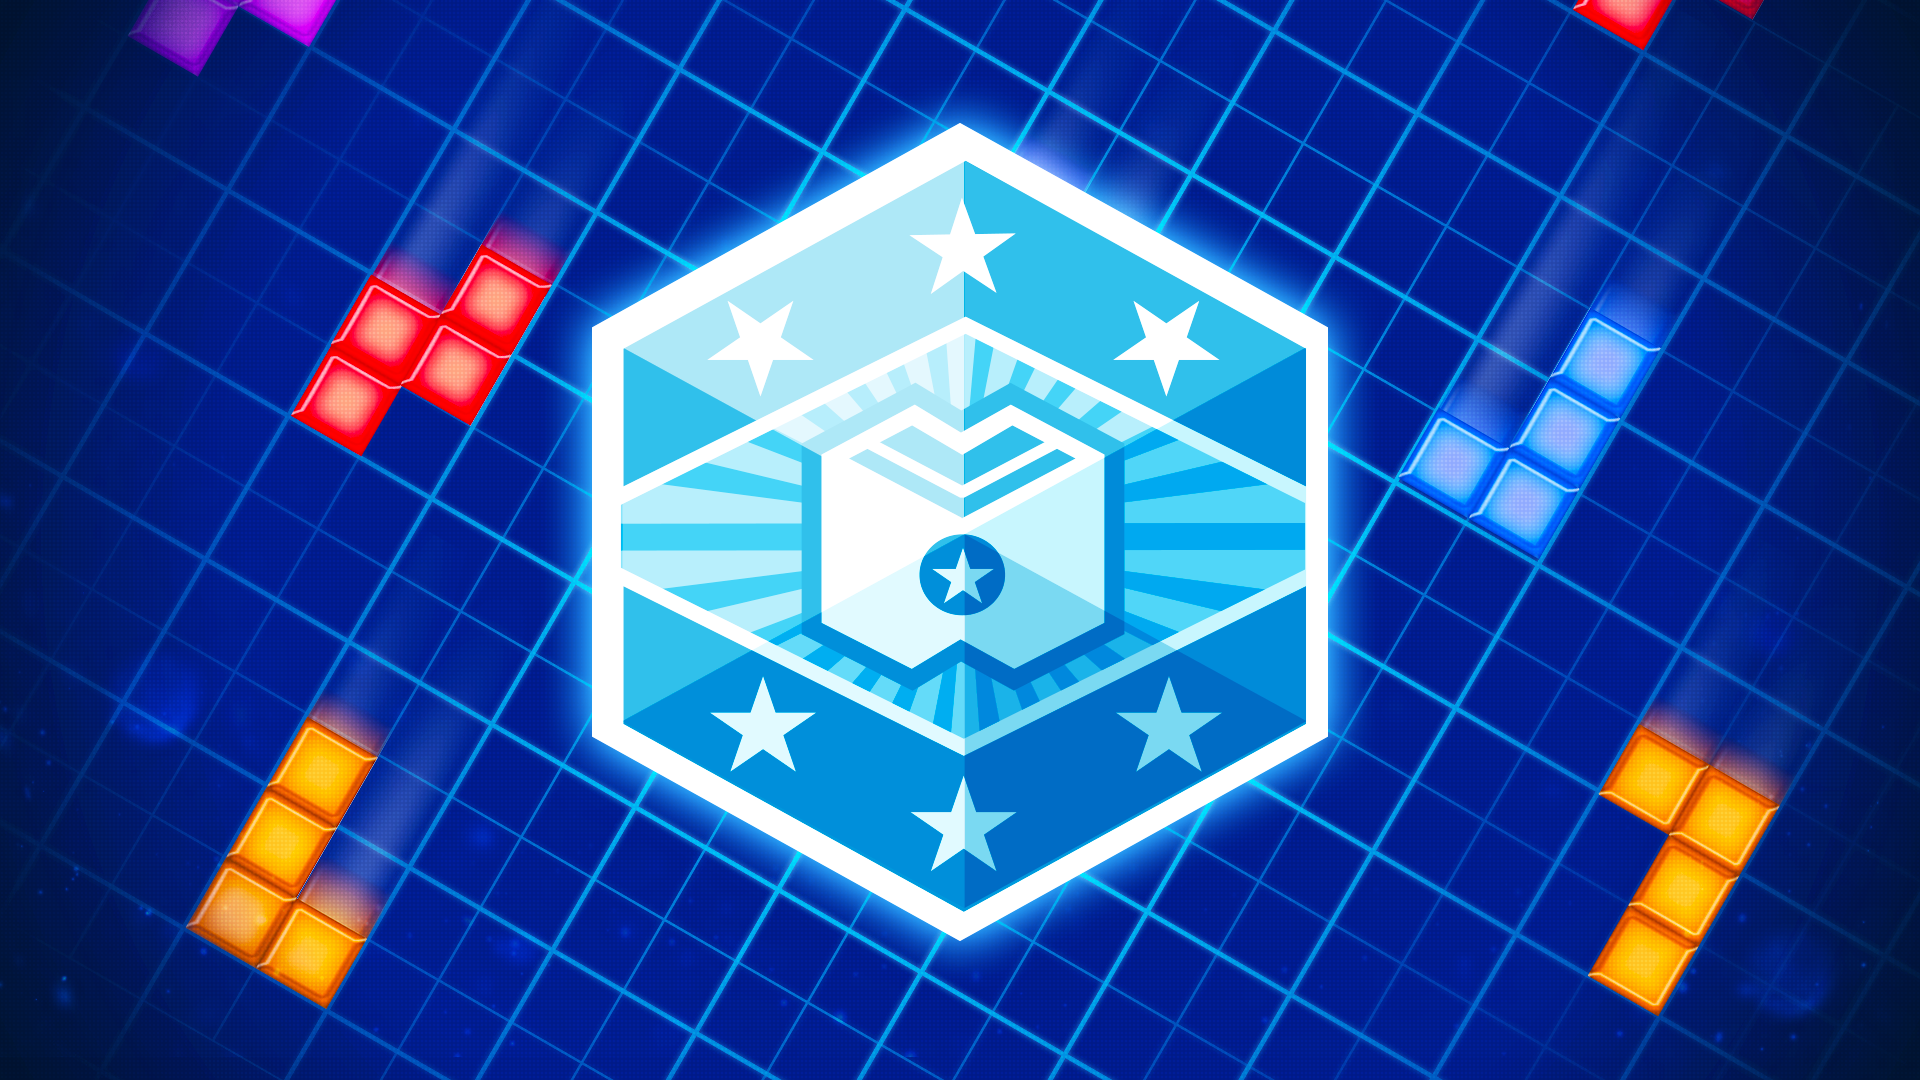 Icon for Mode Master